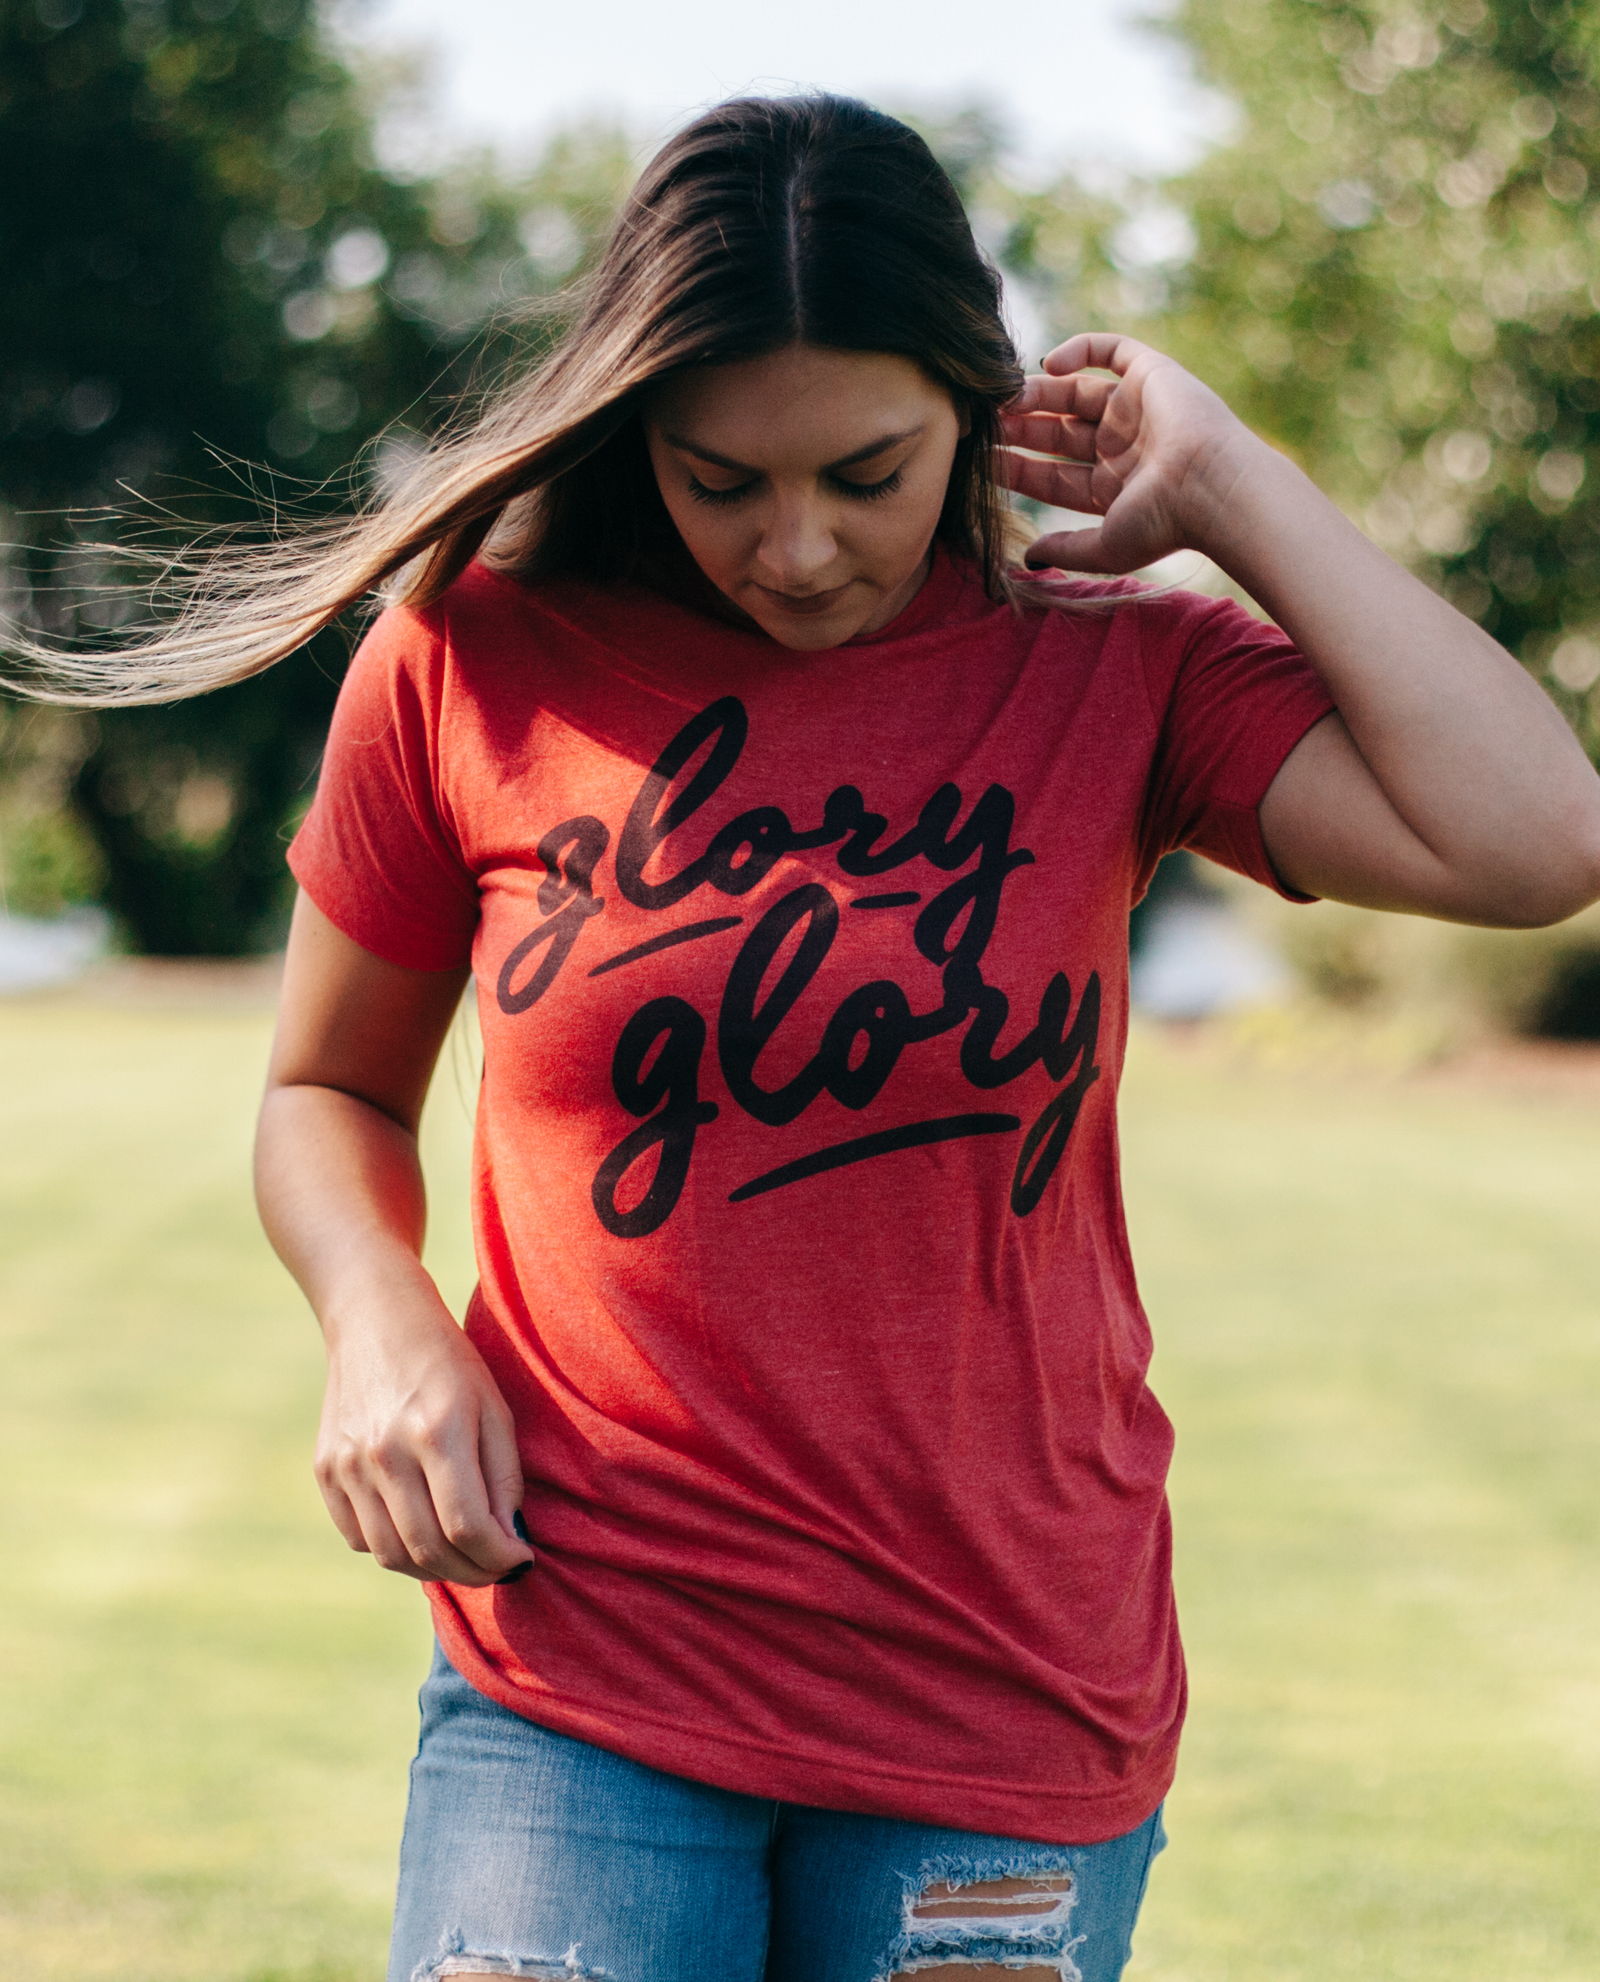 Woman wearing red Glory Glory shirt with jeans